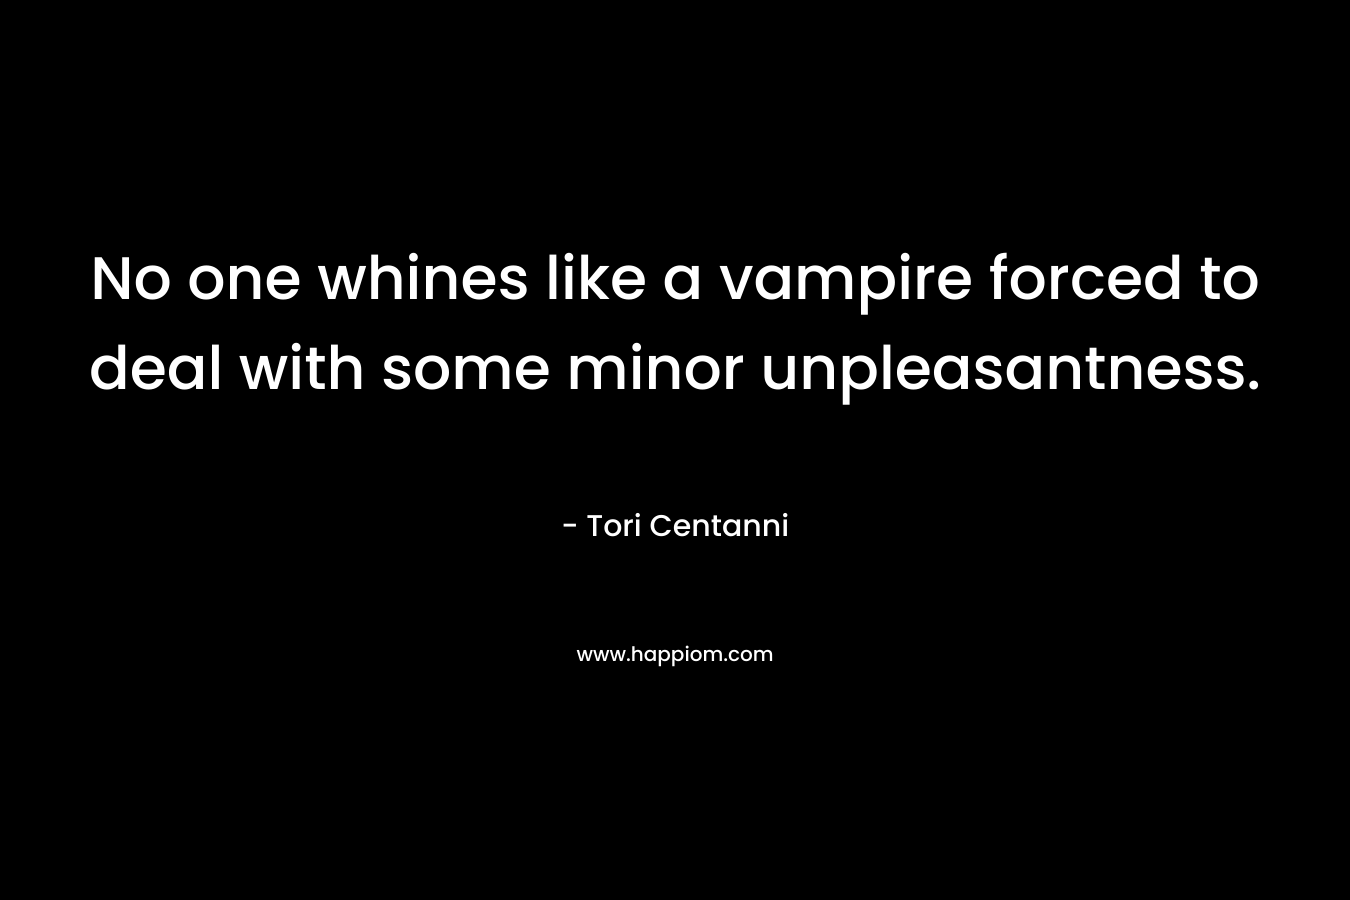 No one whines like a vampire forced to deal with some minor unpleasantness.